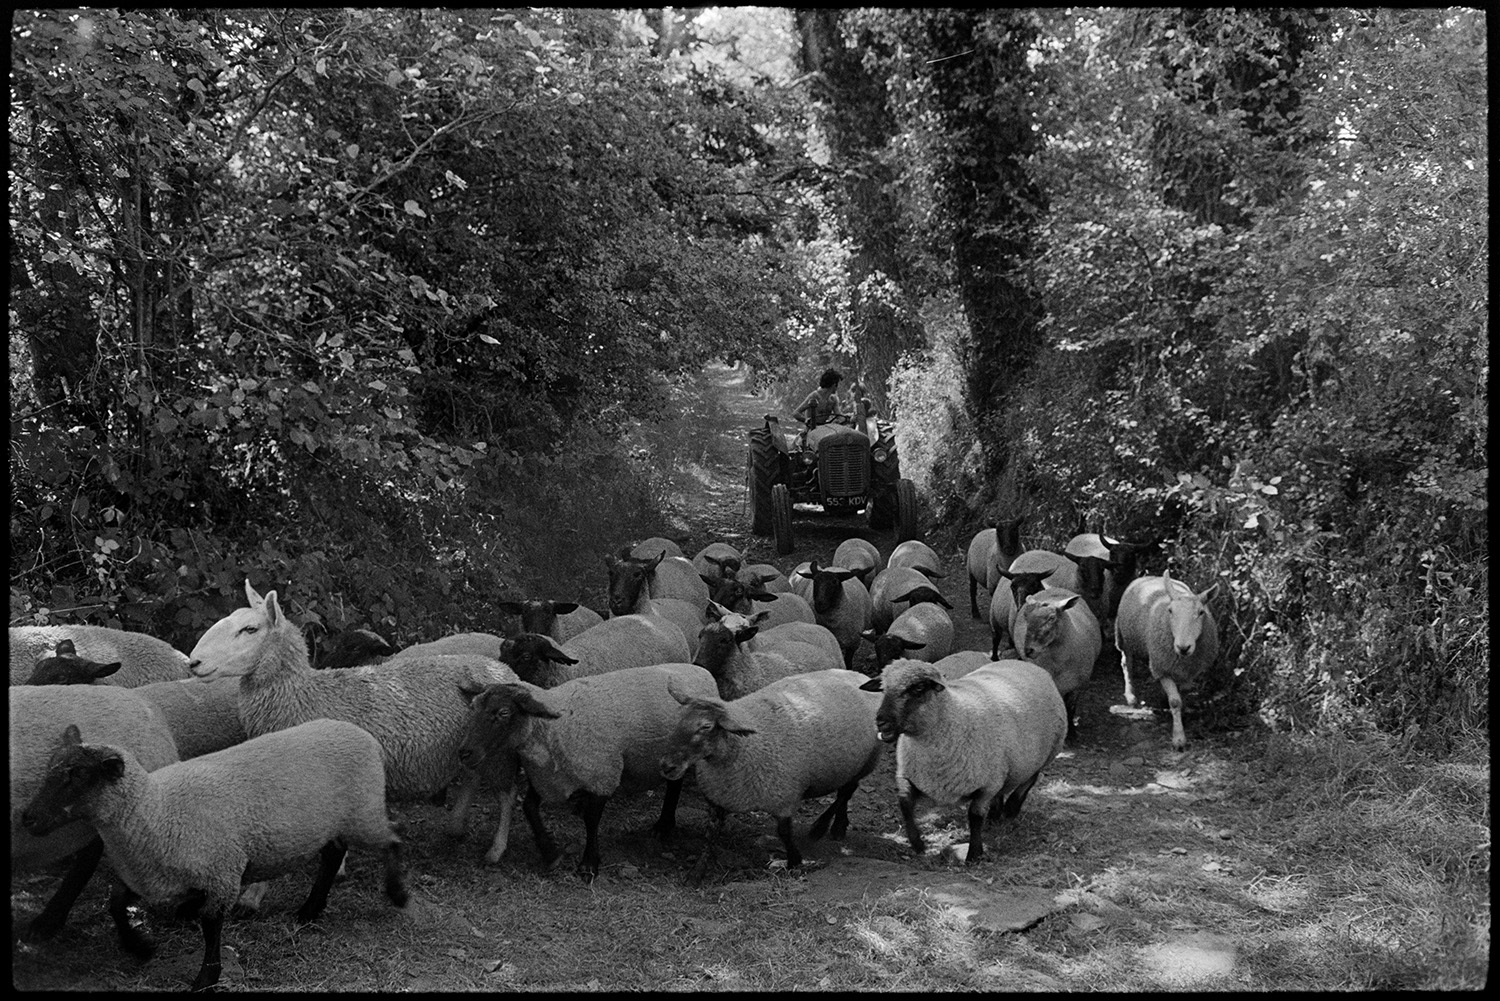 Shepherds dipping and herding sheep. 
[Graham or David Ward herding sheep along a tree lined lane at Parsonage, Iddesleigh, with a tractor.]